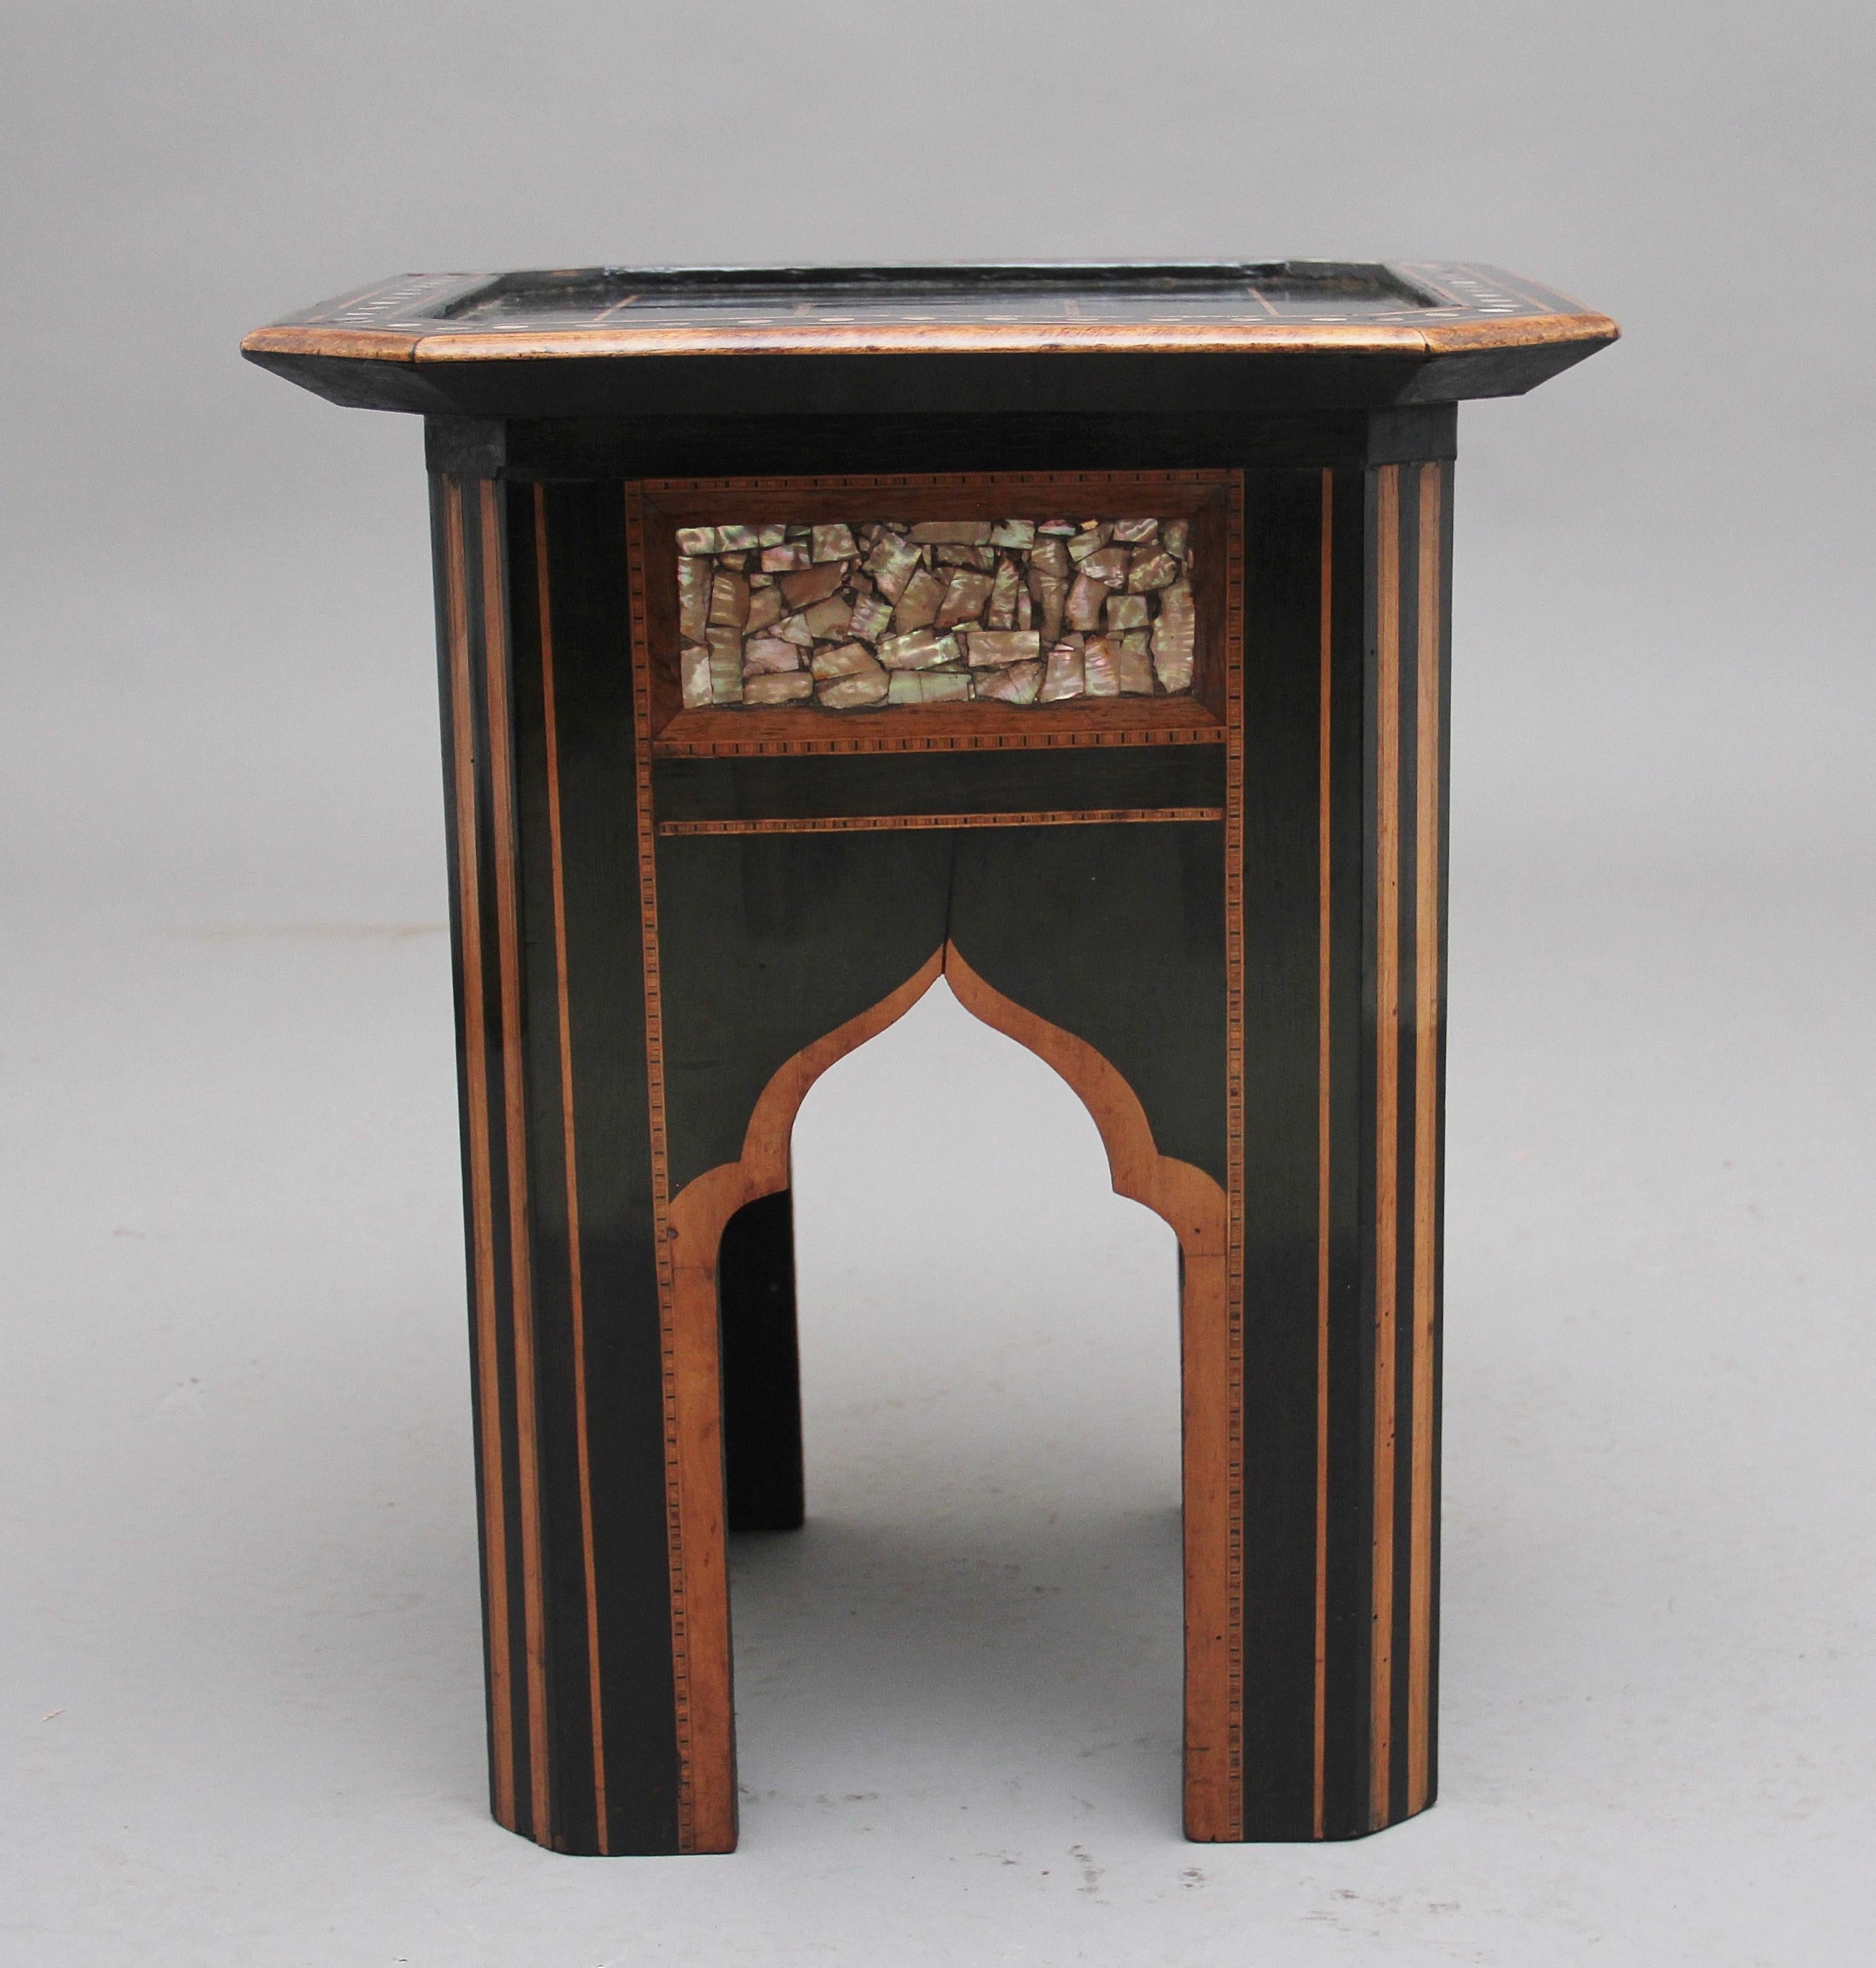 Turkish 19th Century Ebony and Inlaid Occasional Table